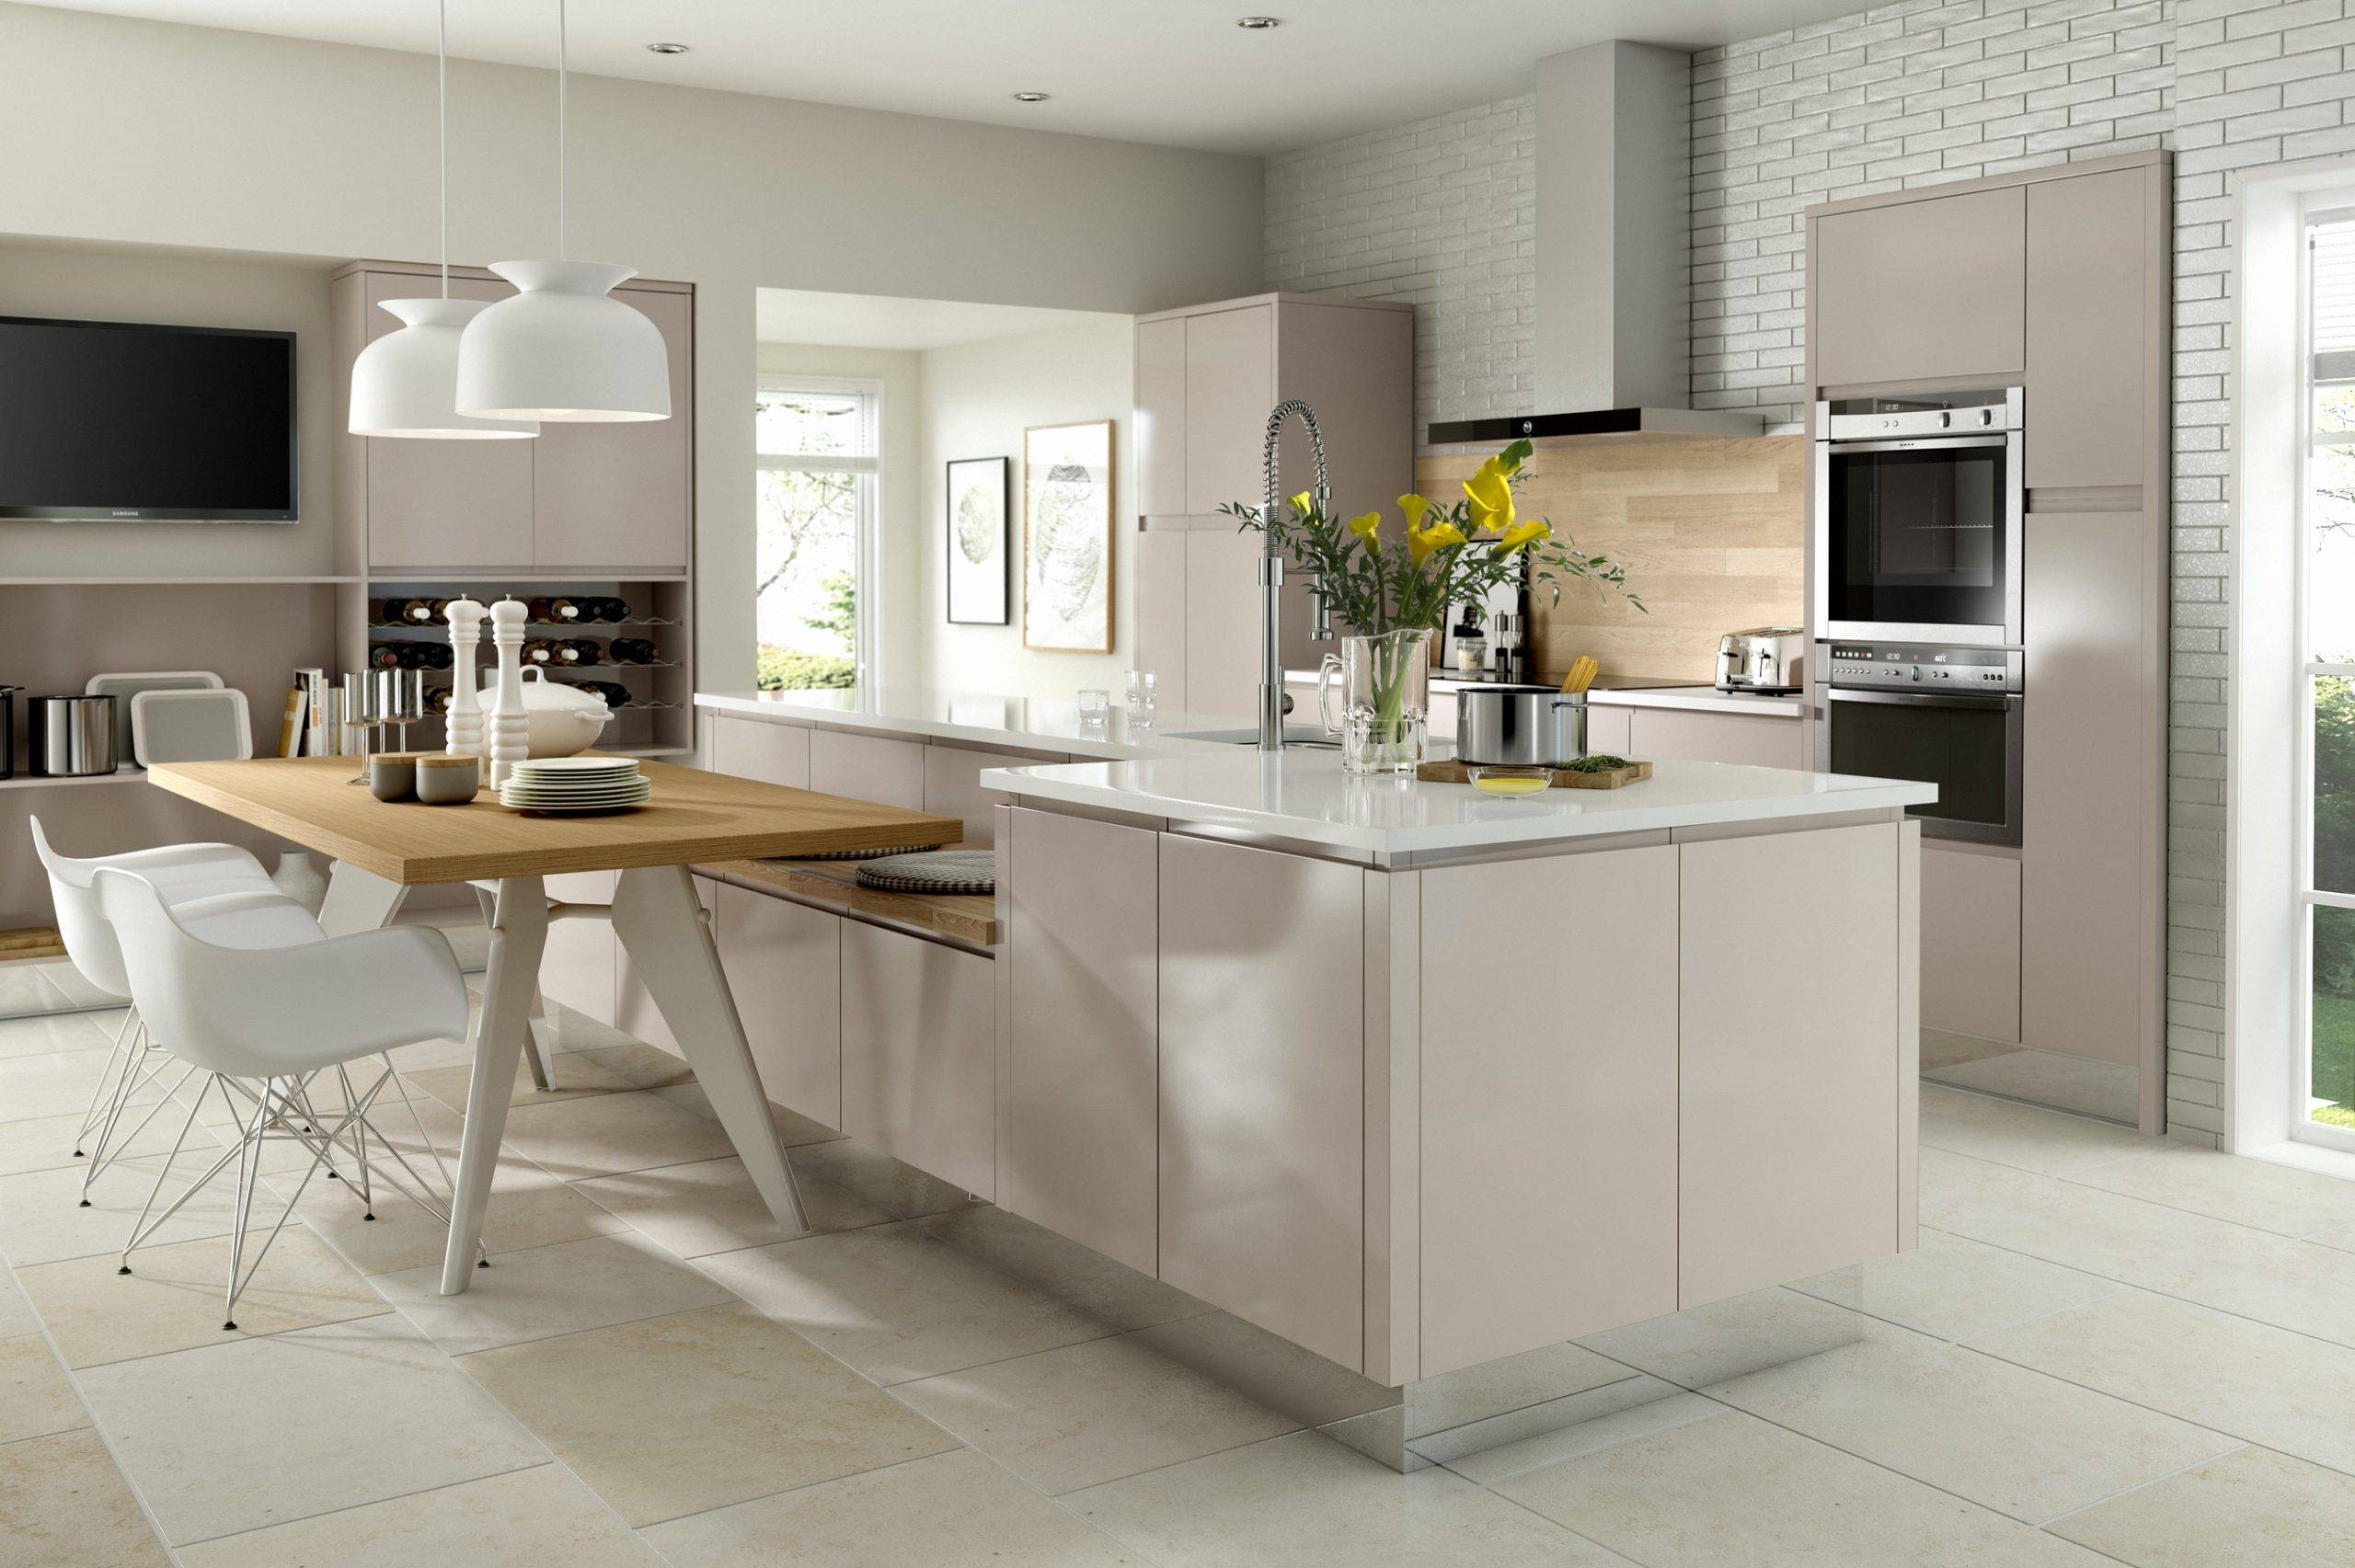 Solo Gloss Cashmere 1 | Net Kitchens, Walthamstow